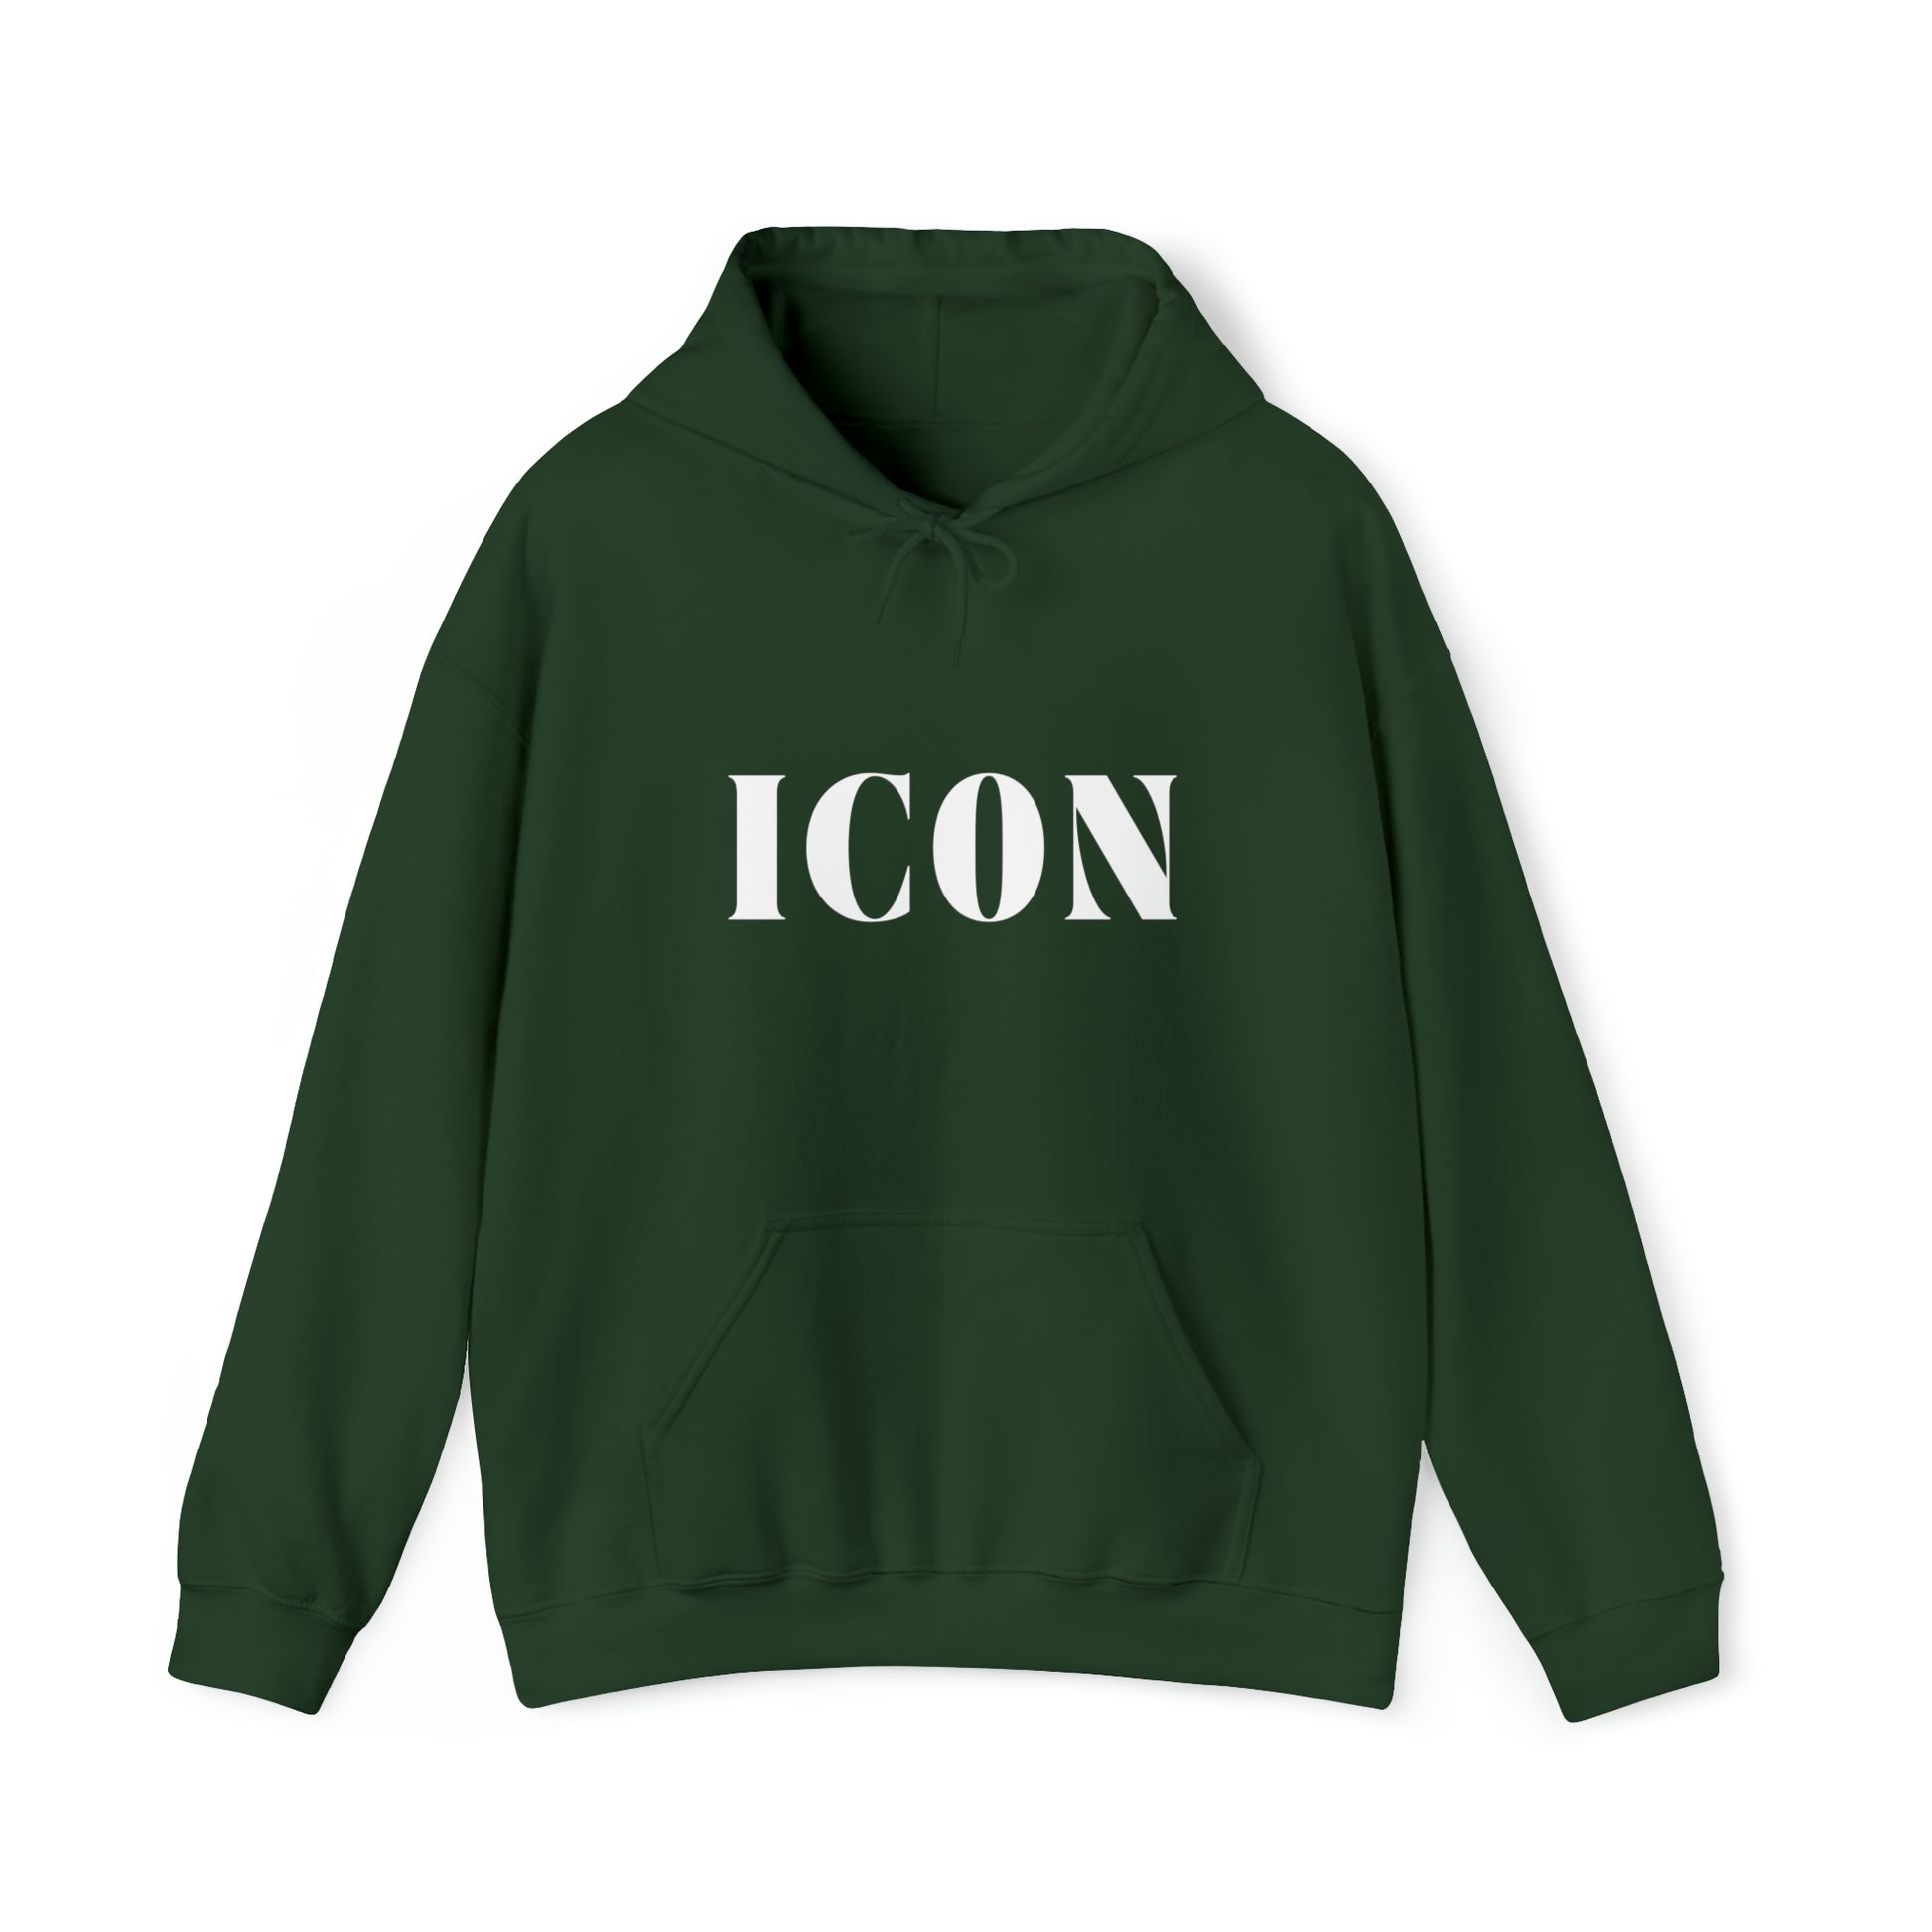 S Forest Green Icon Hoodie from HoodySZN.com